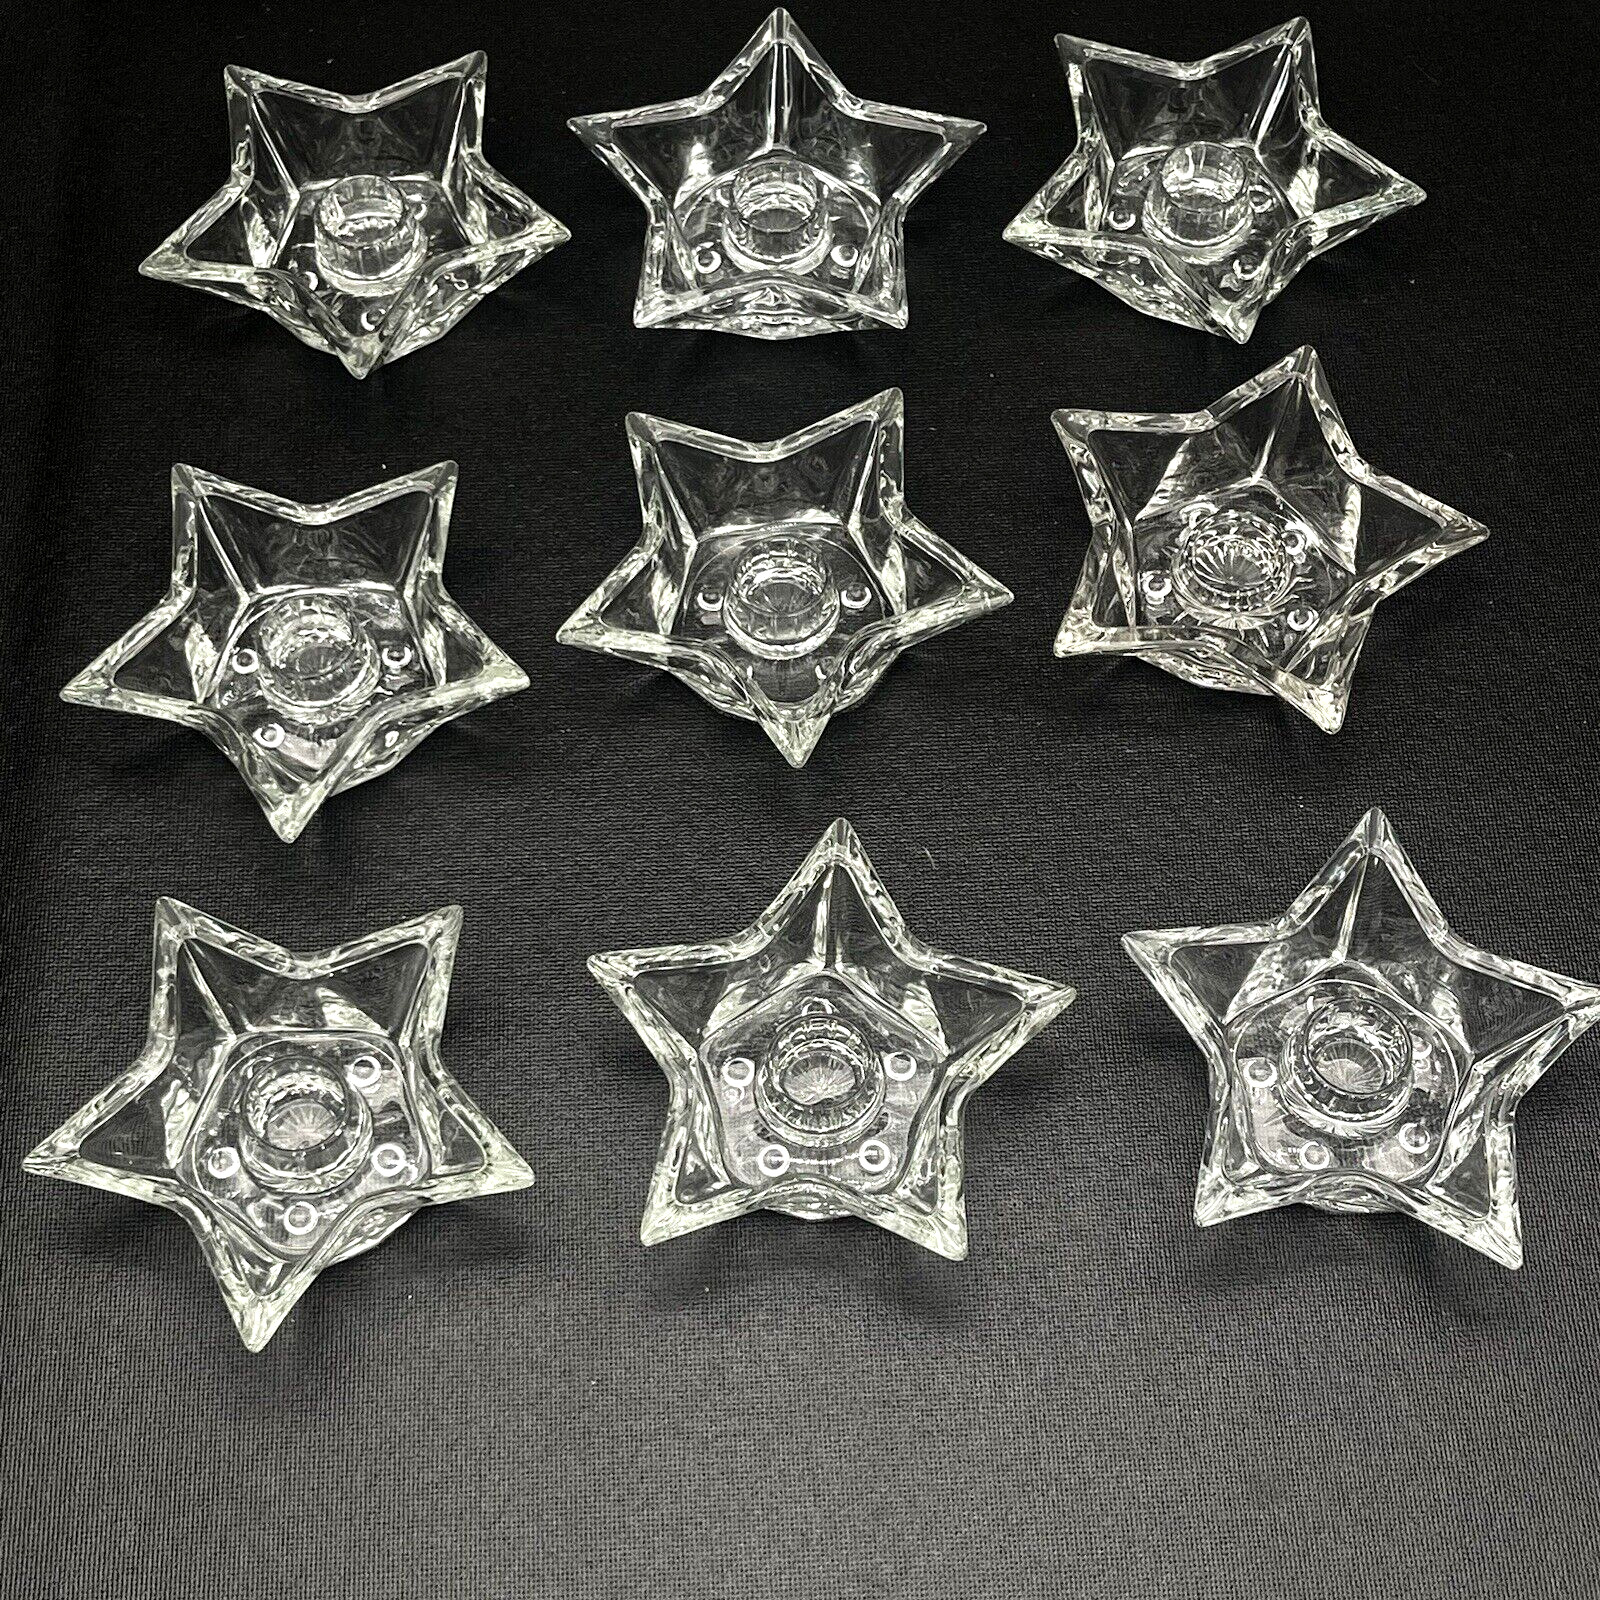 9 Vintage Star Glass Candle Holders 5-Point Taper Low Profile Candlesticks Set